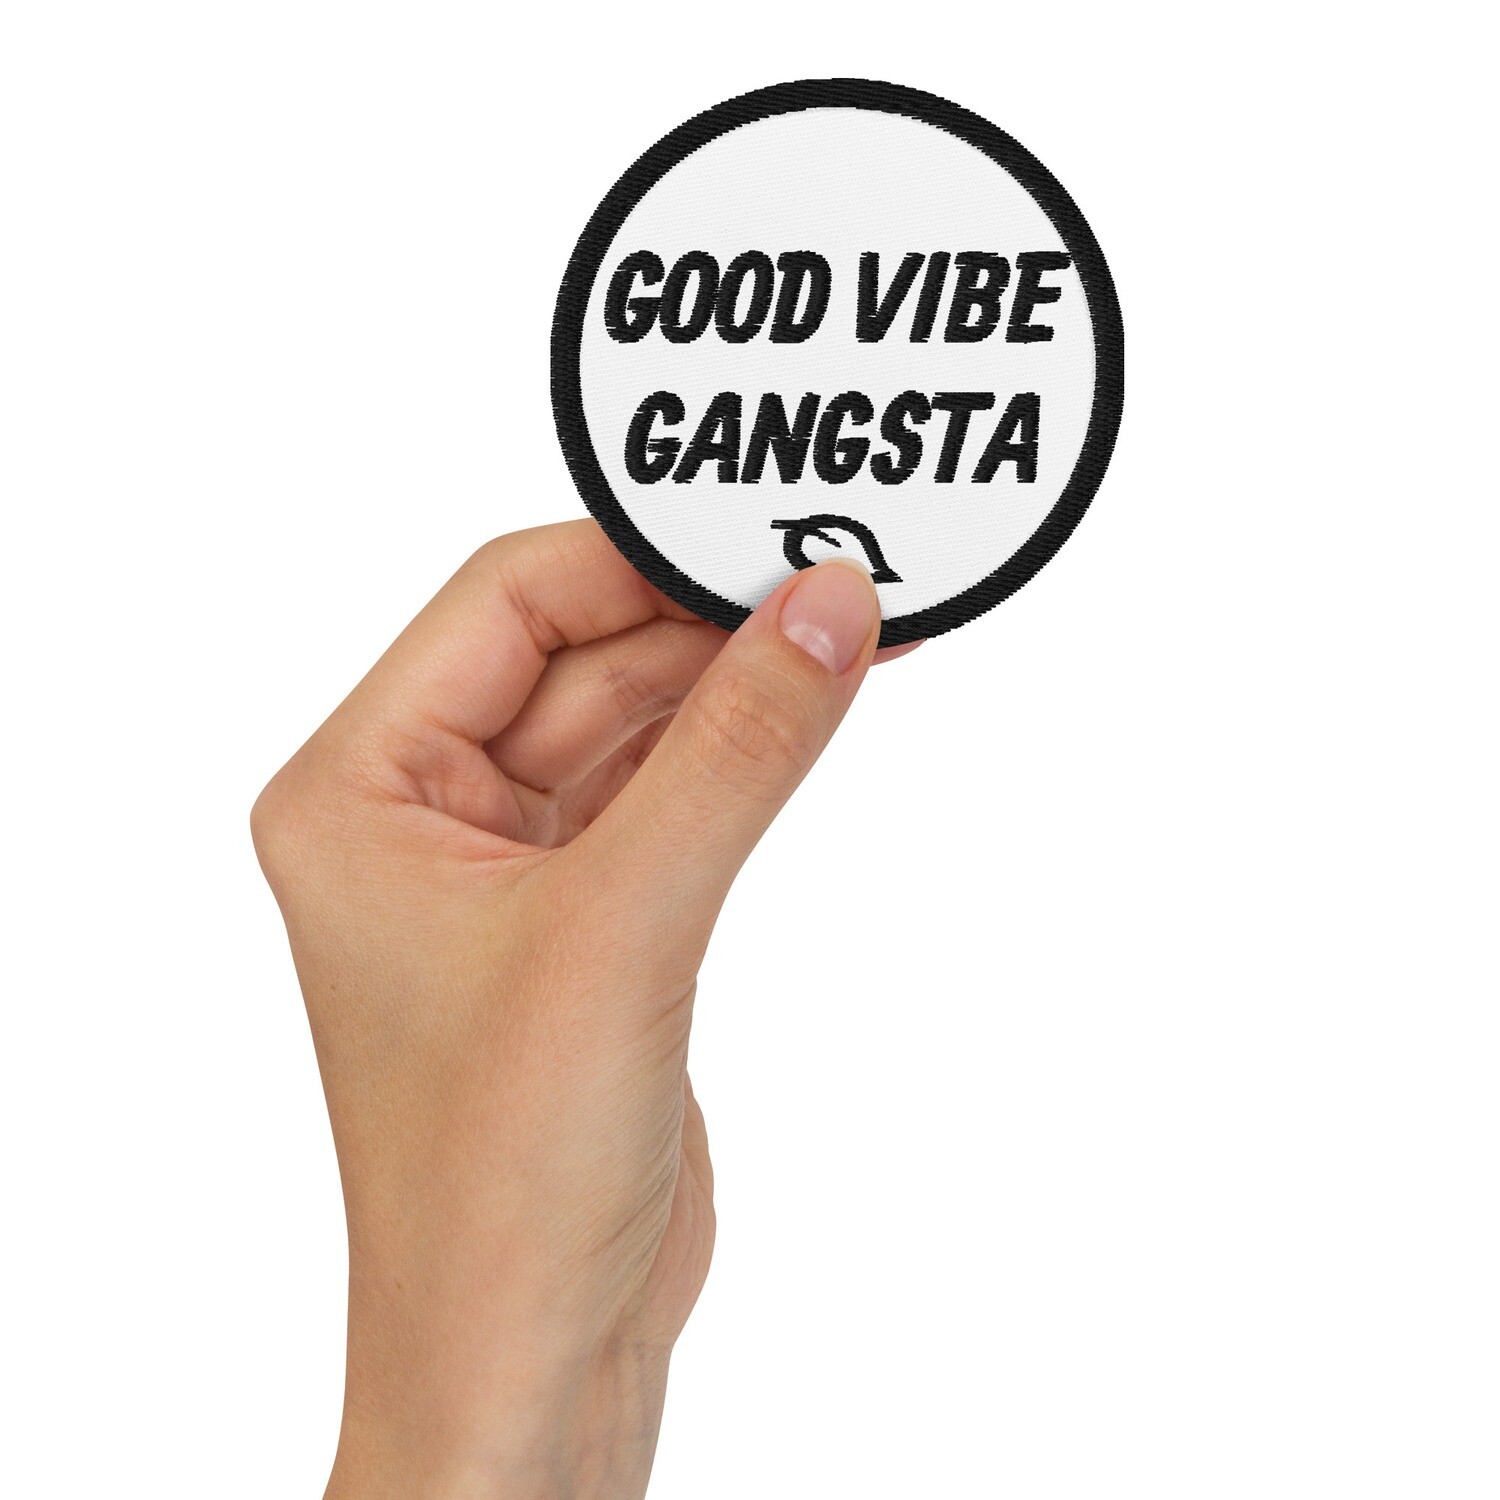 Good Vibe Gangsta | VOS | Embroidered Patch | Black